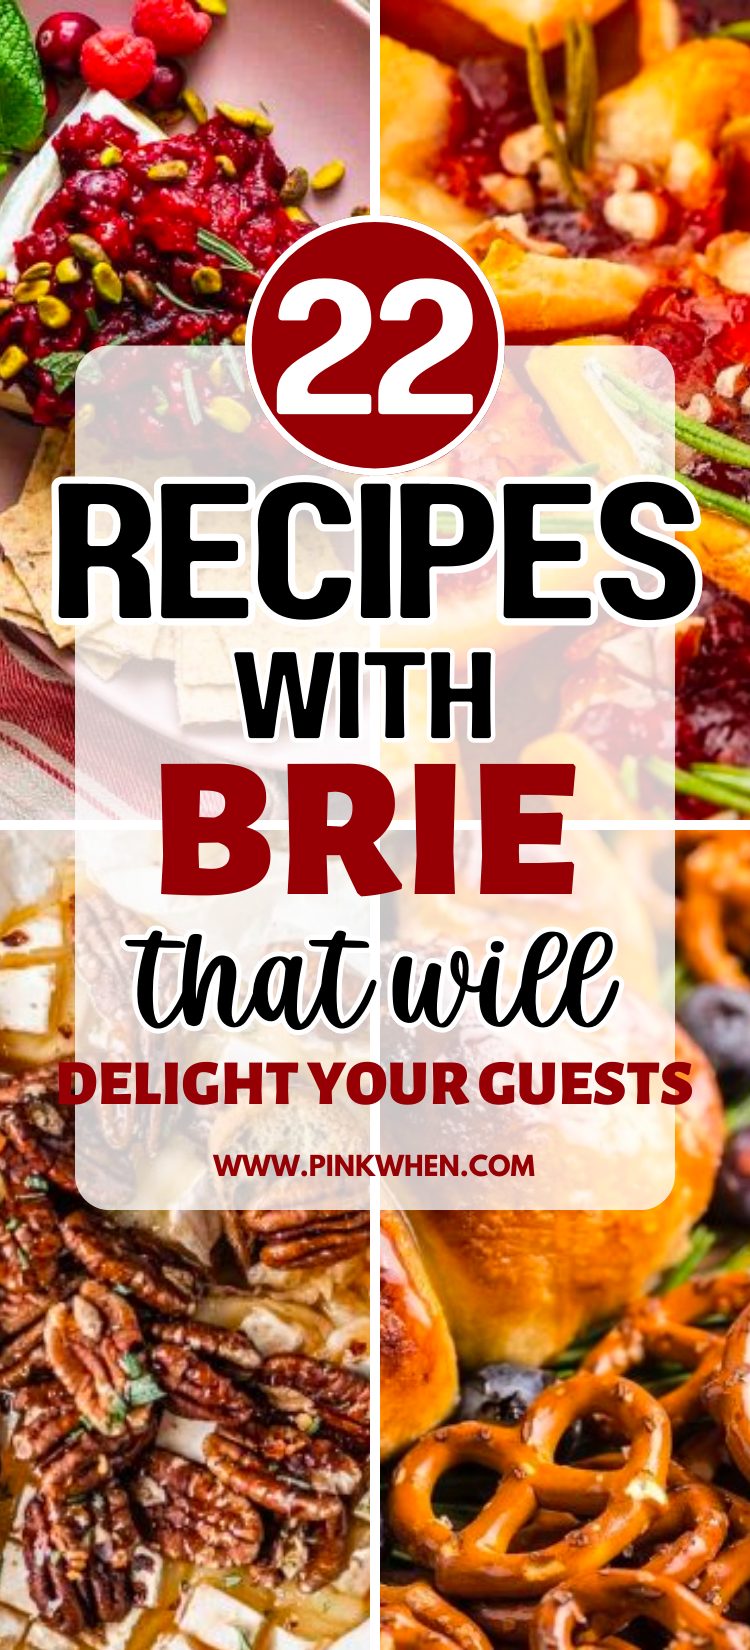 Recipes with Brie That Will Delight Your Guests